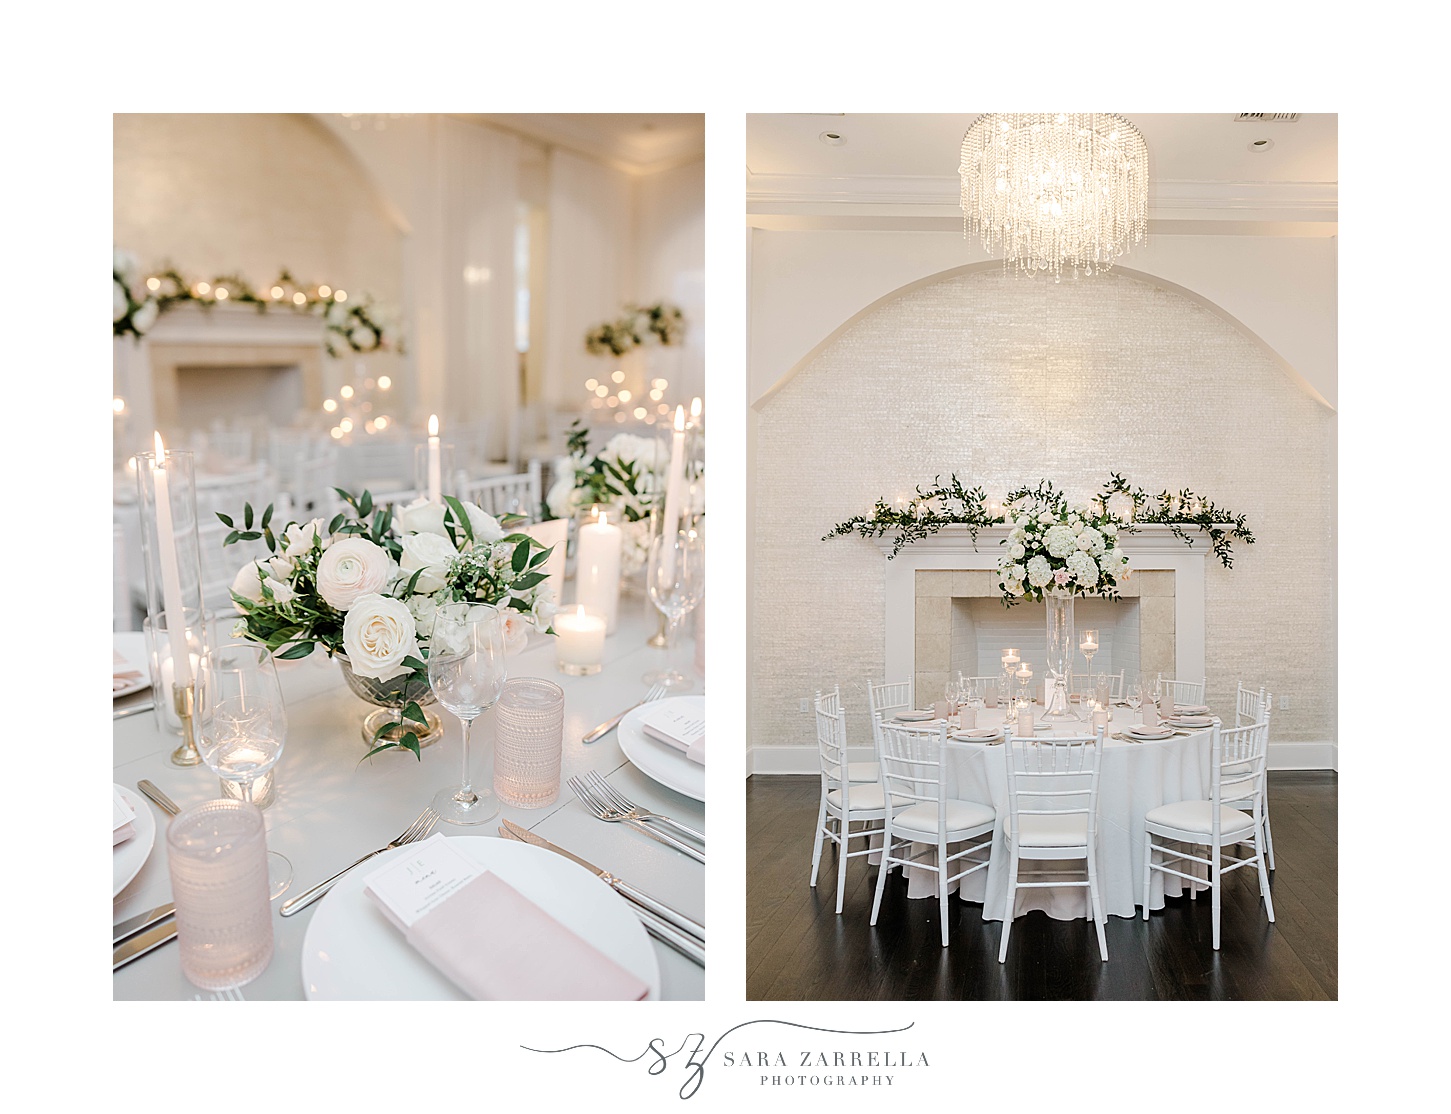 Belle Mer Island House wedding reception with white and green flowers